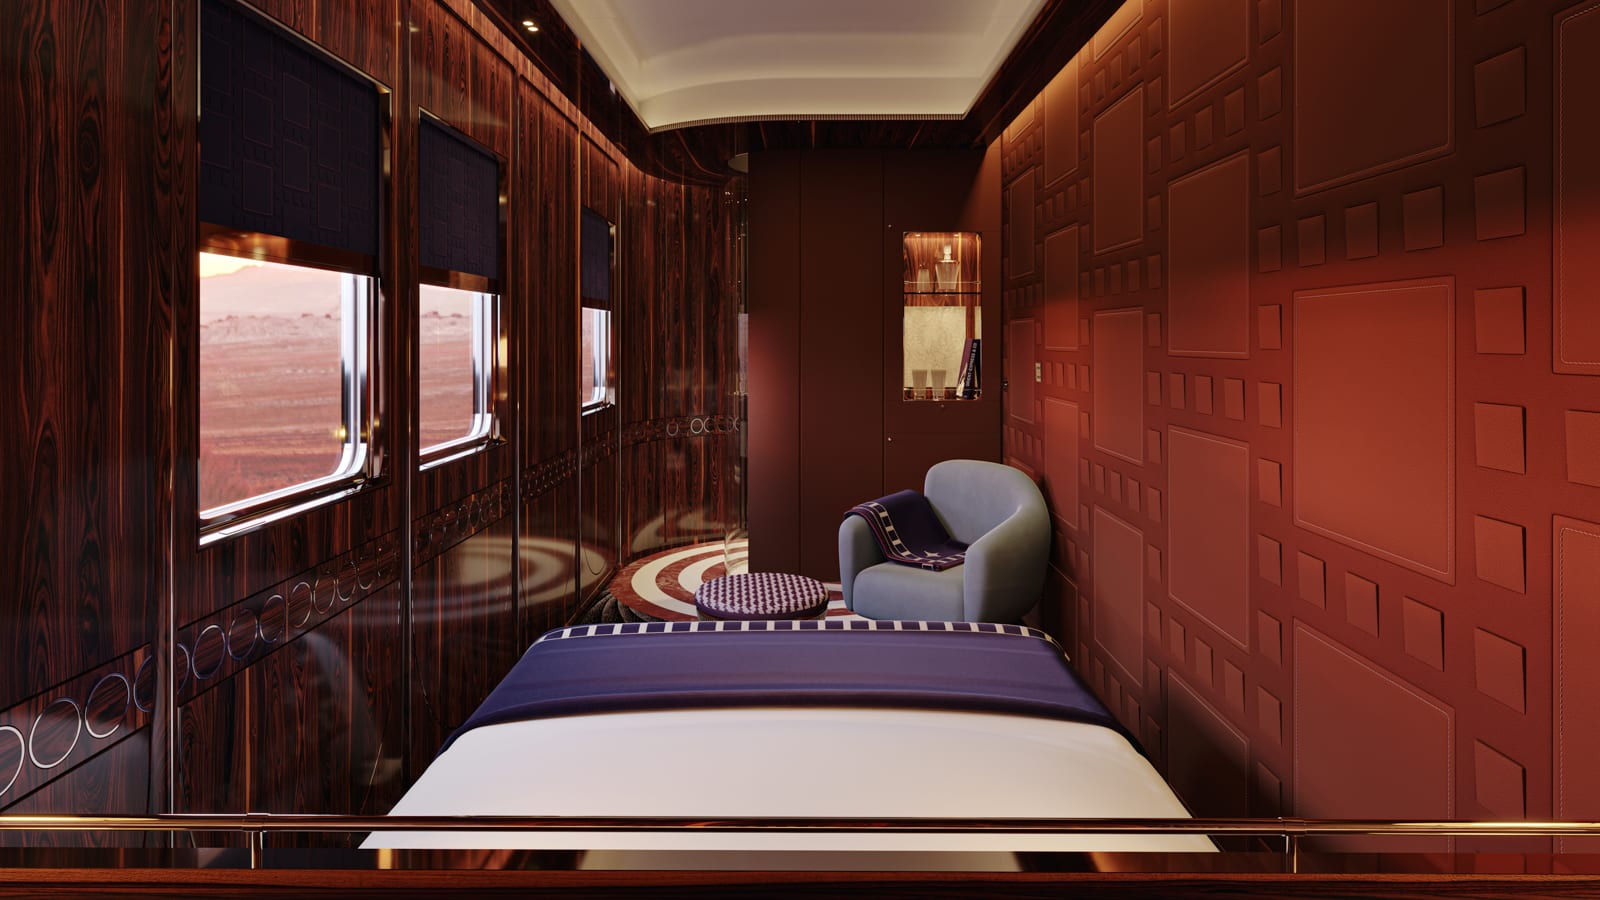 Interiors of the revamped Orient Express revealed